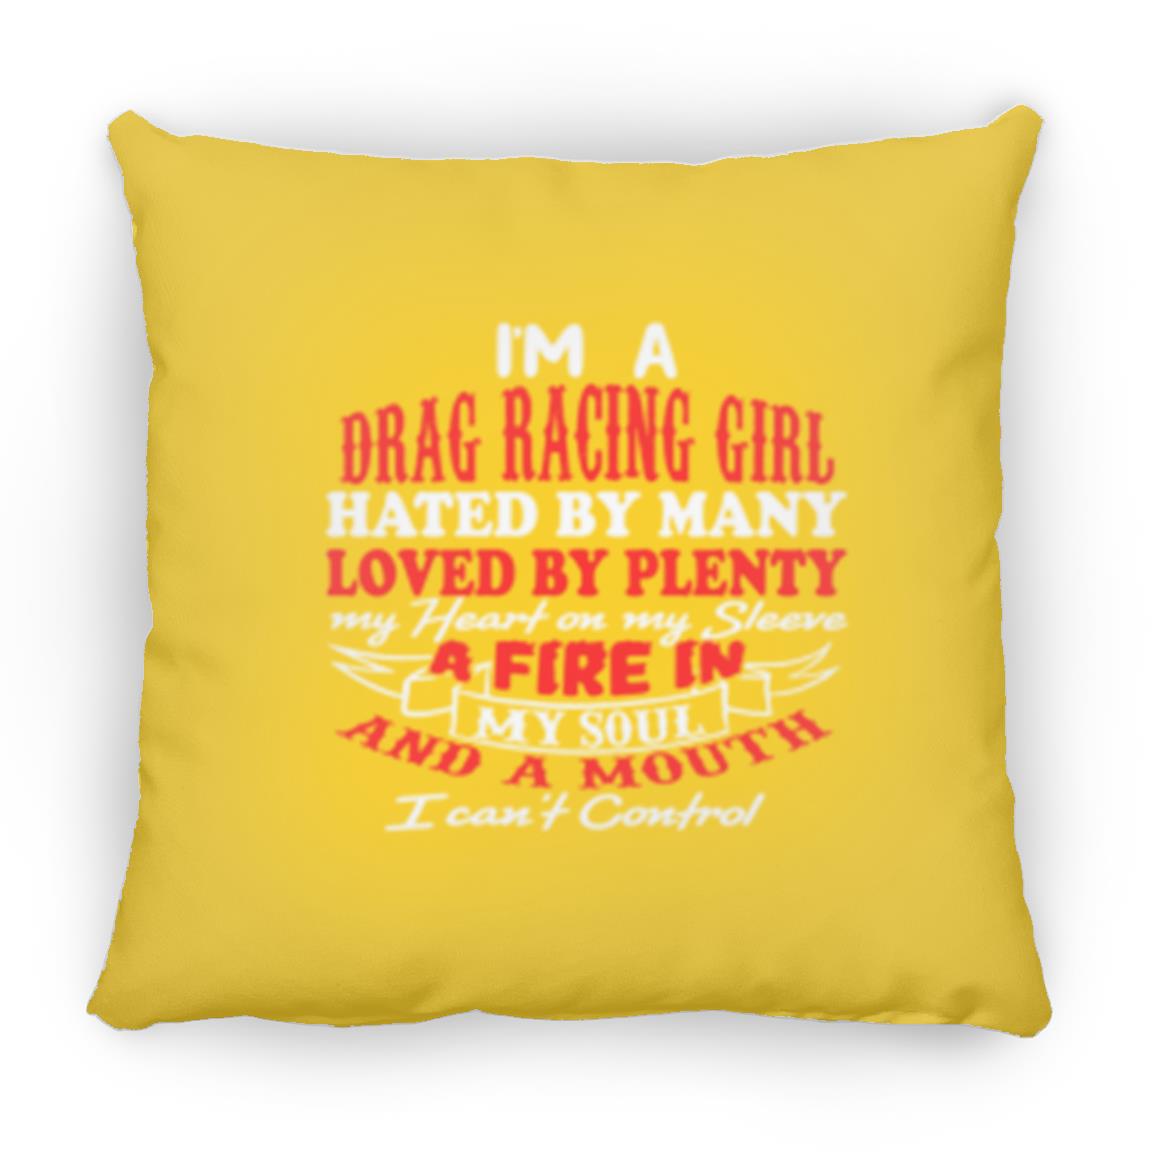 I'm A Drag Racing Girl Hated By Many Loved By Plenty Medium Square Pillow